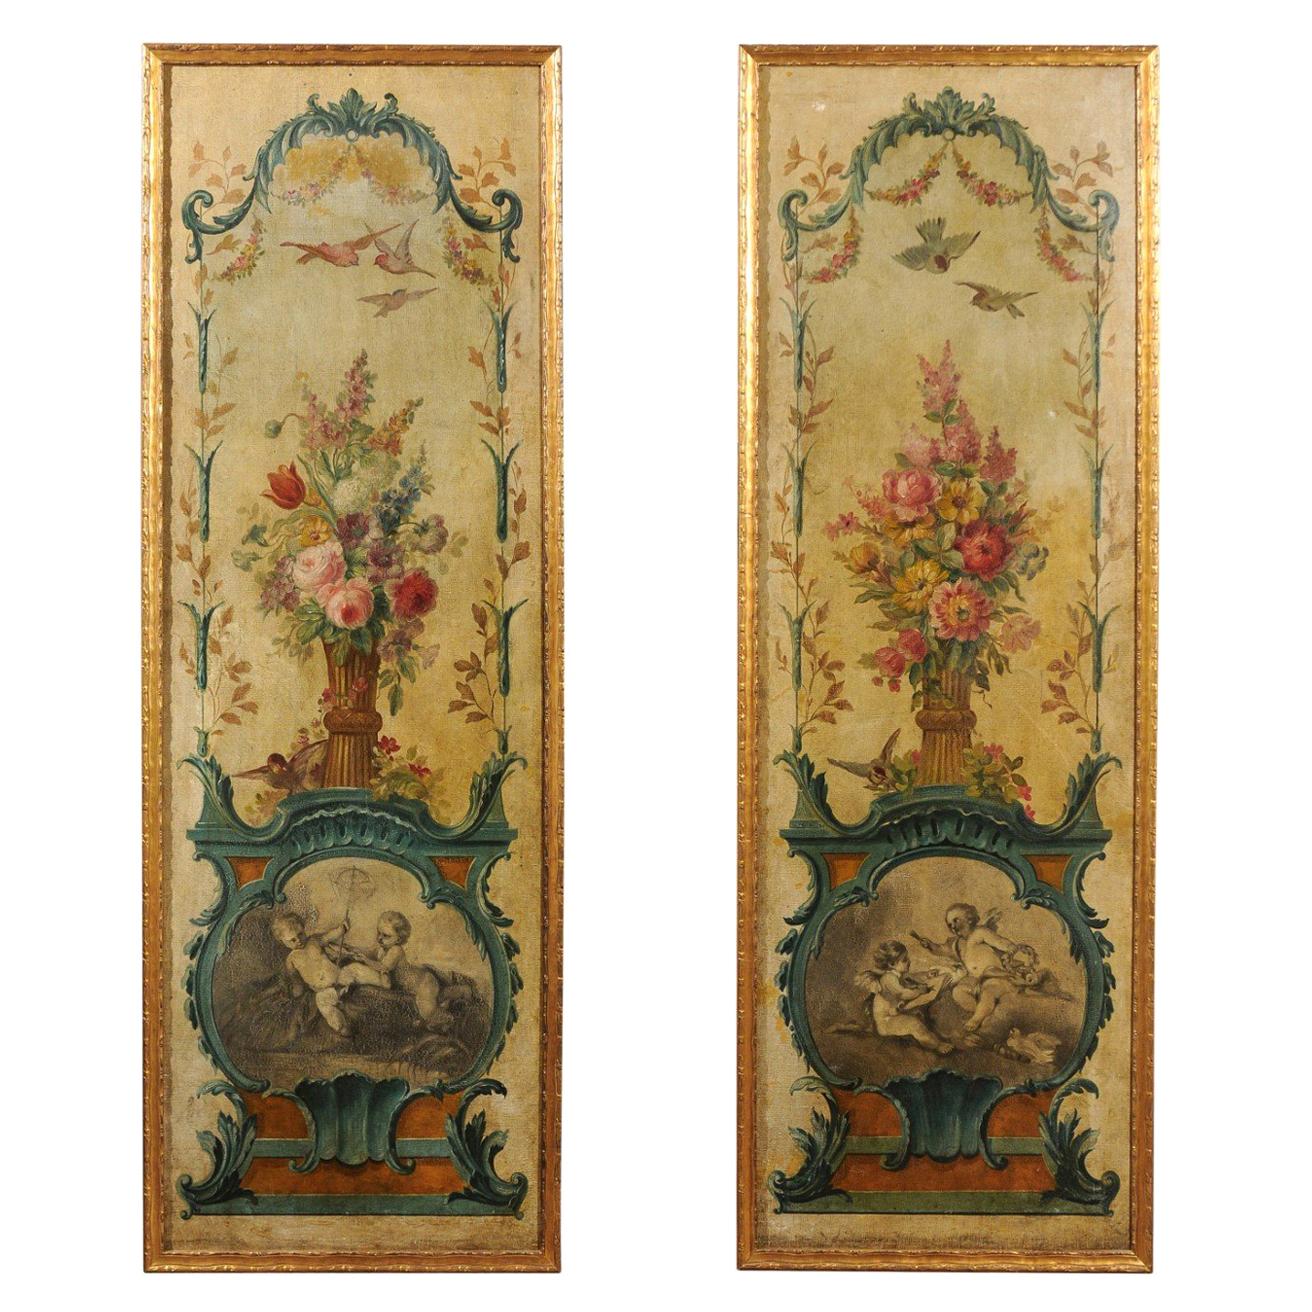 Pair of French 18th Century Louis XV Painted Panels with Floral and Angel Motifs